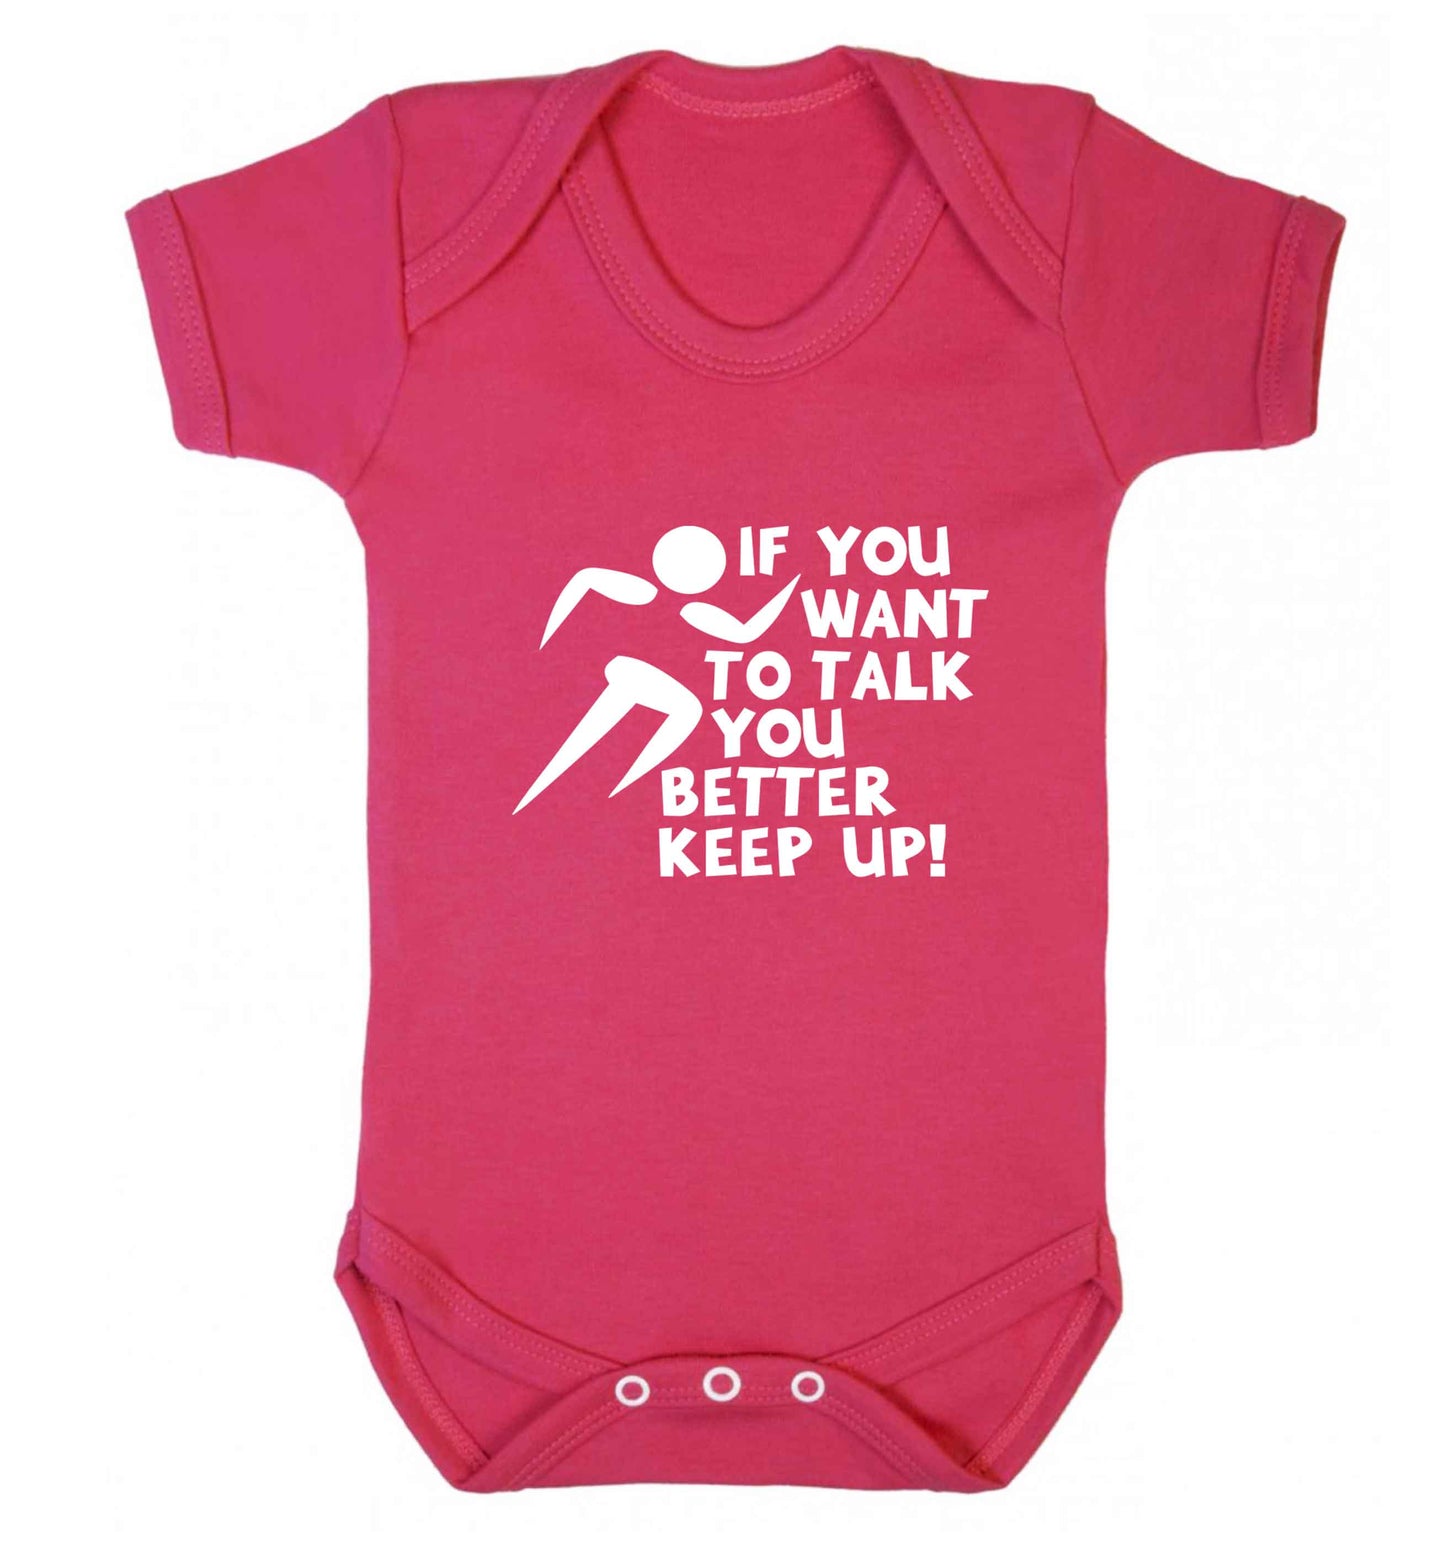 If you want to talk you better keep up! baby vest dark pink 18-24 months